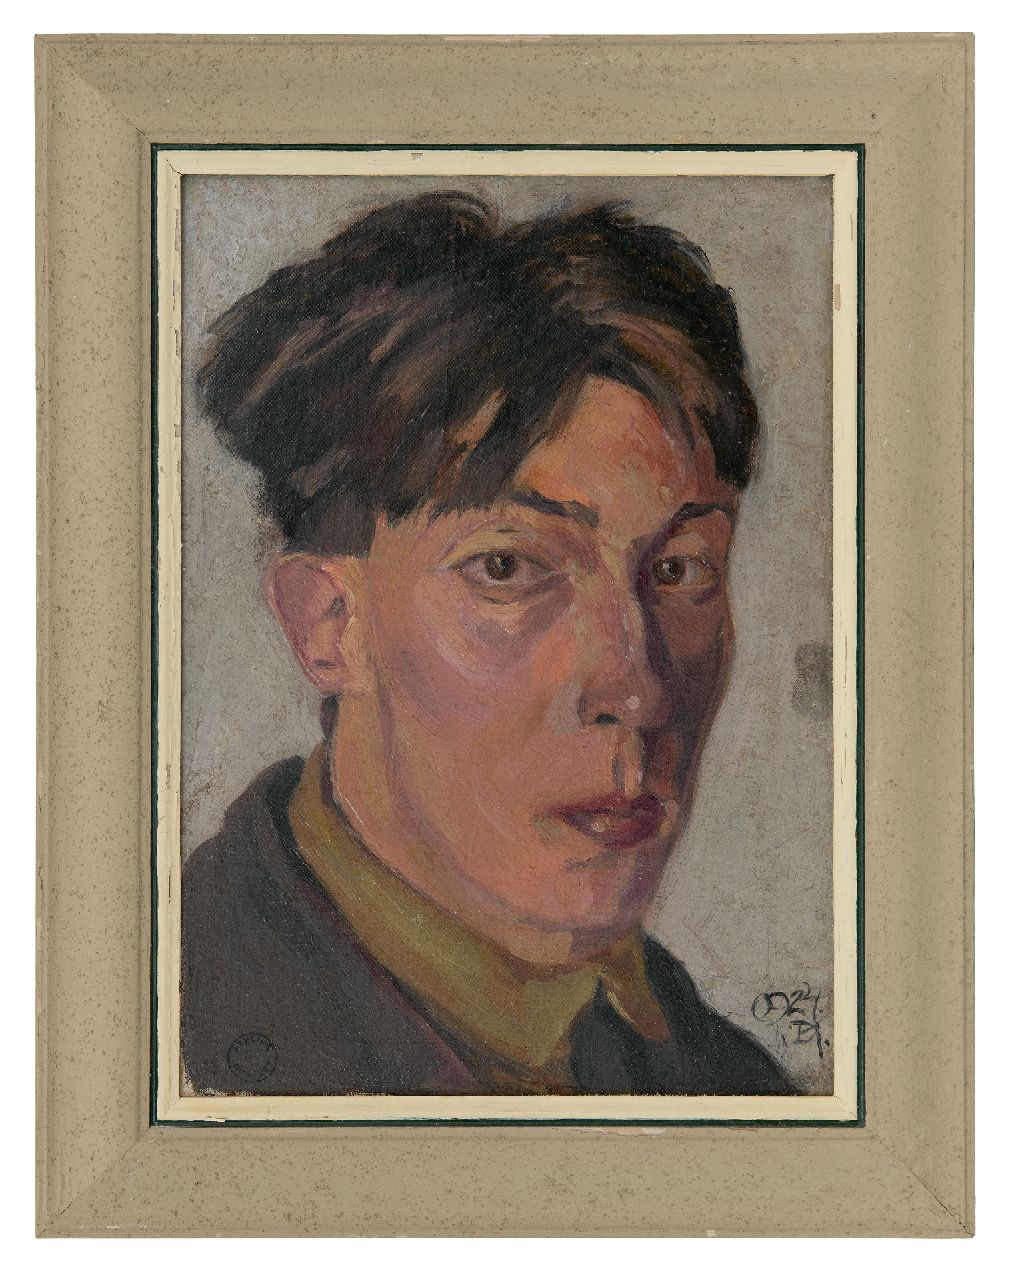 Ket D.H.  | Dirk Hendrik 'Dick' Ket | Paintings offered for sale | Self-portrait, turned to the right, oil on canvas laid down on board 36.5 x 26.2 cm, signed l.r. and dated '24